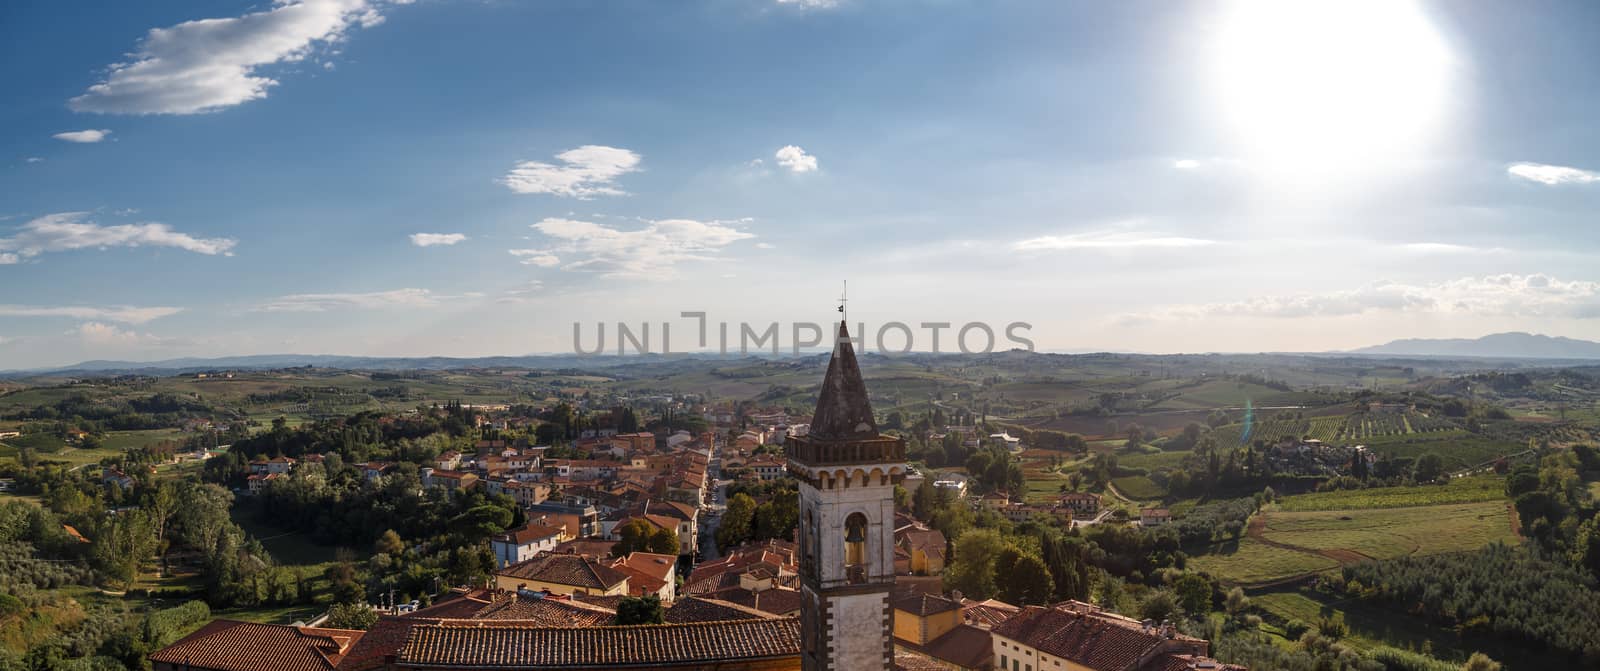 Panoramic top view of Vinci Village around meadow area from Conti Guidi Castle in Italy, under bright blue sky background.